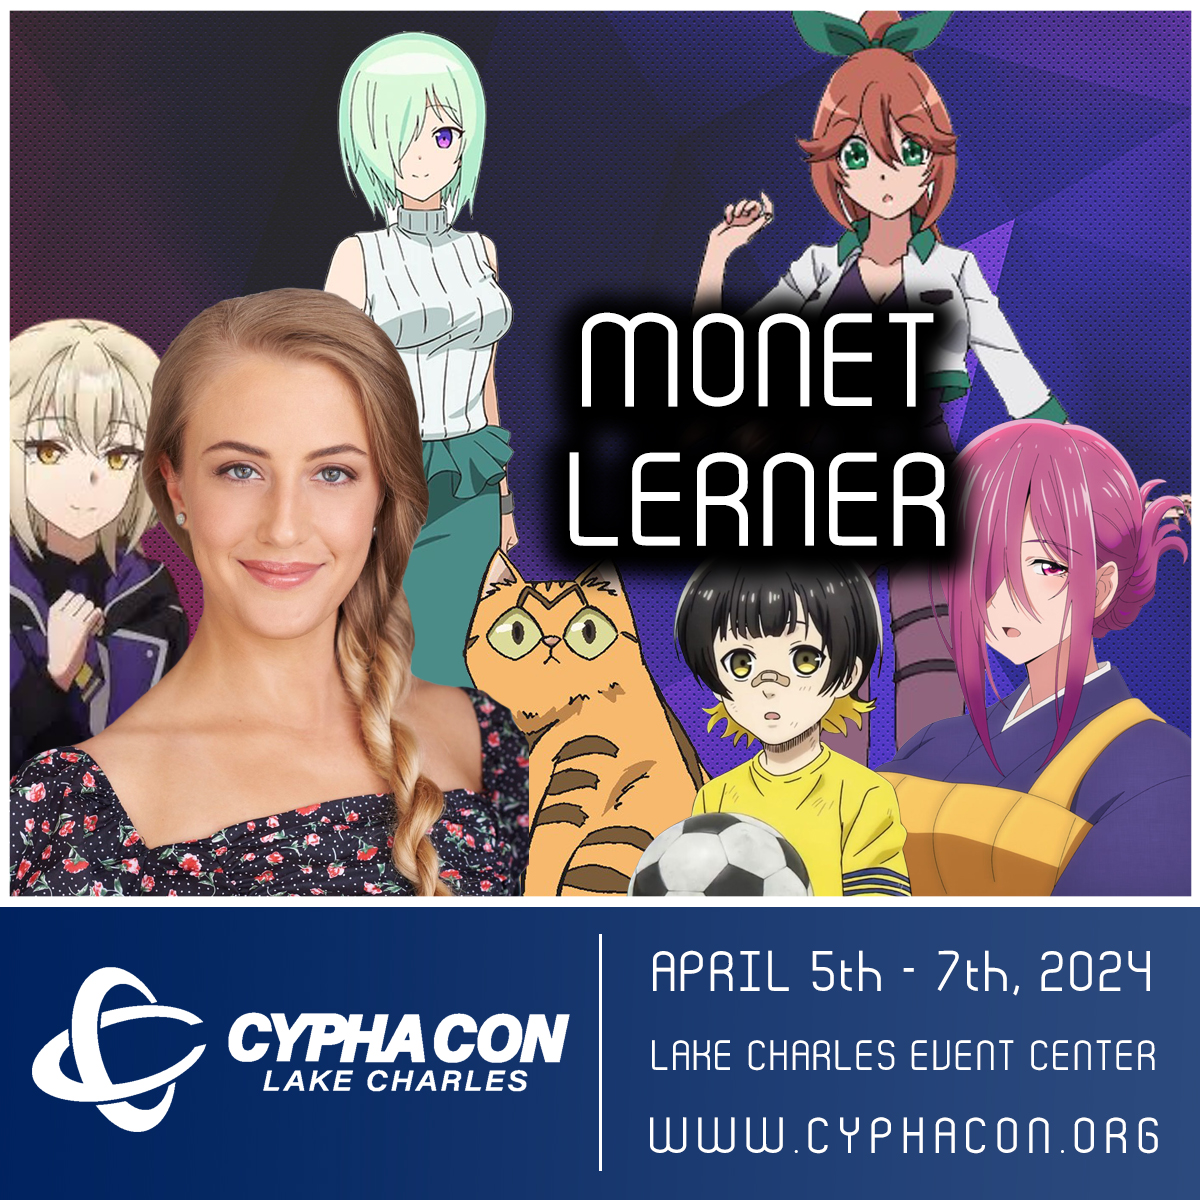 CYPHACON is pleased to announce our first Special Guest, Monet Lerner! Monet will be joining us April 5th - 7th, 2024 at the @LCCivicCenter in Lake Charles Louisiana! For complete information visit our website, tickets on sale now! cyphacon.org/speakers/featu…